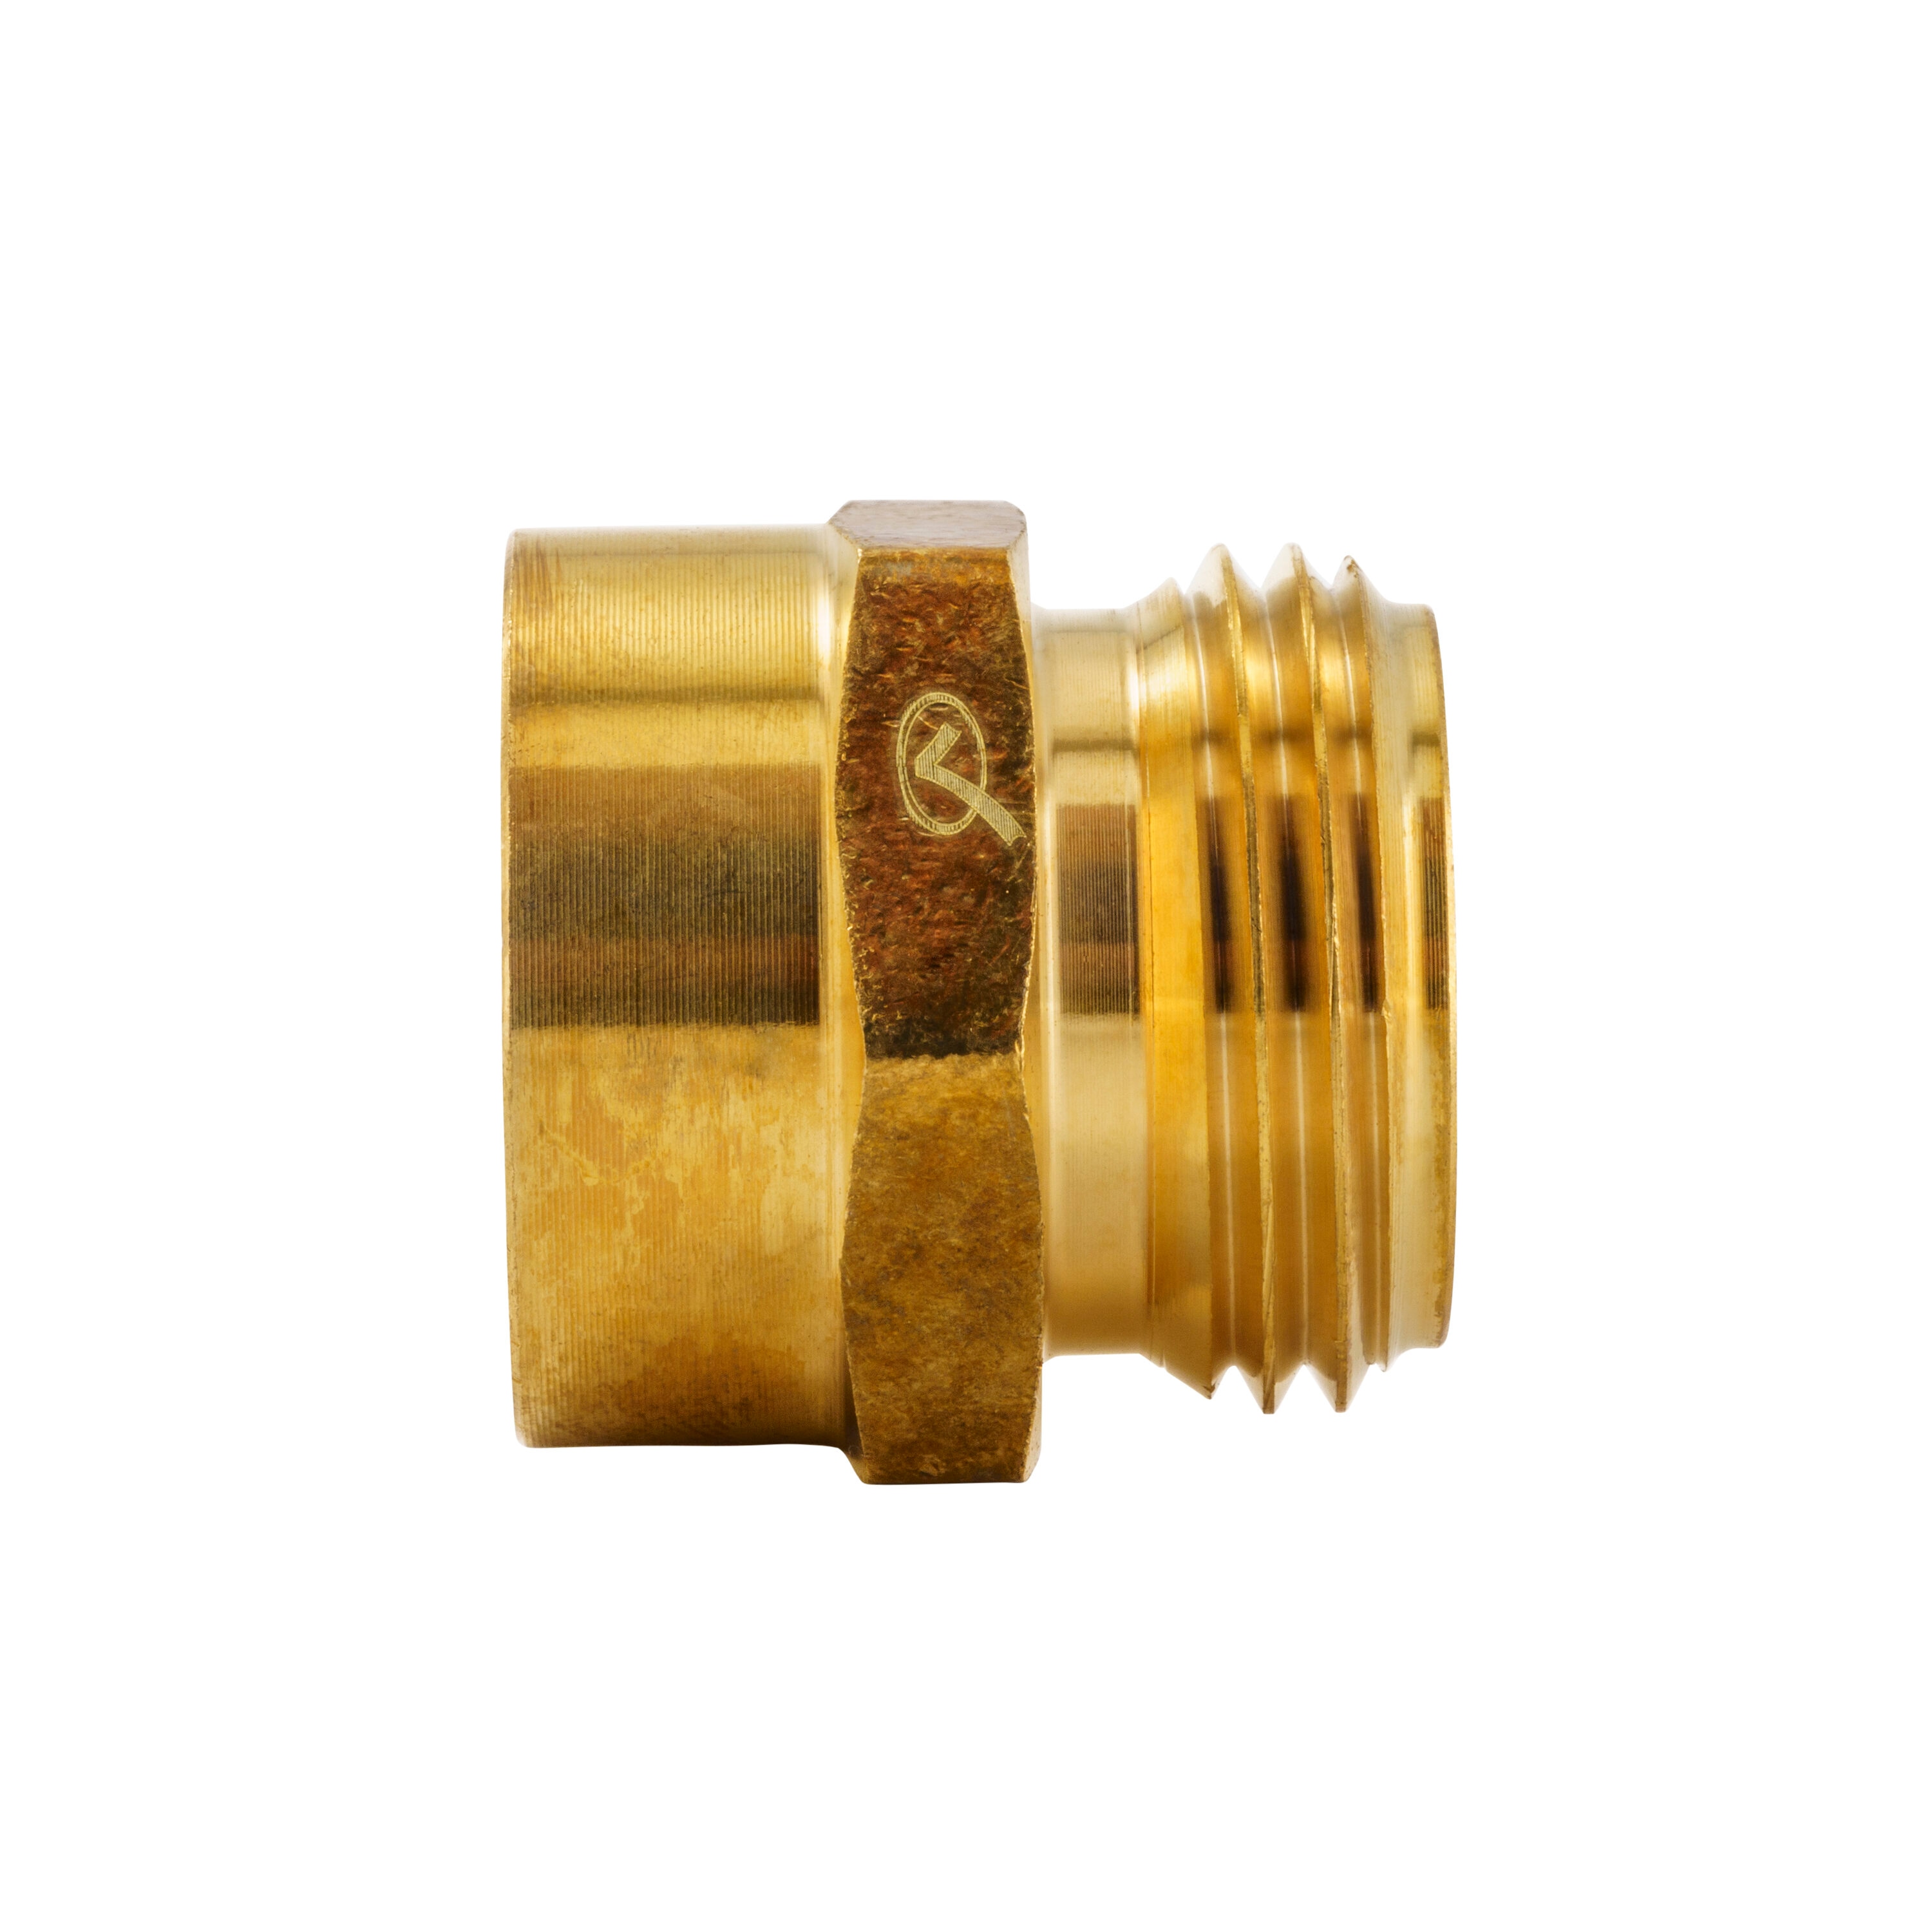 Proline Series 3/4-in x 3/4-in Threaded Tee Fitting in the Brass